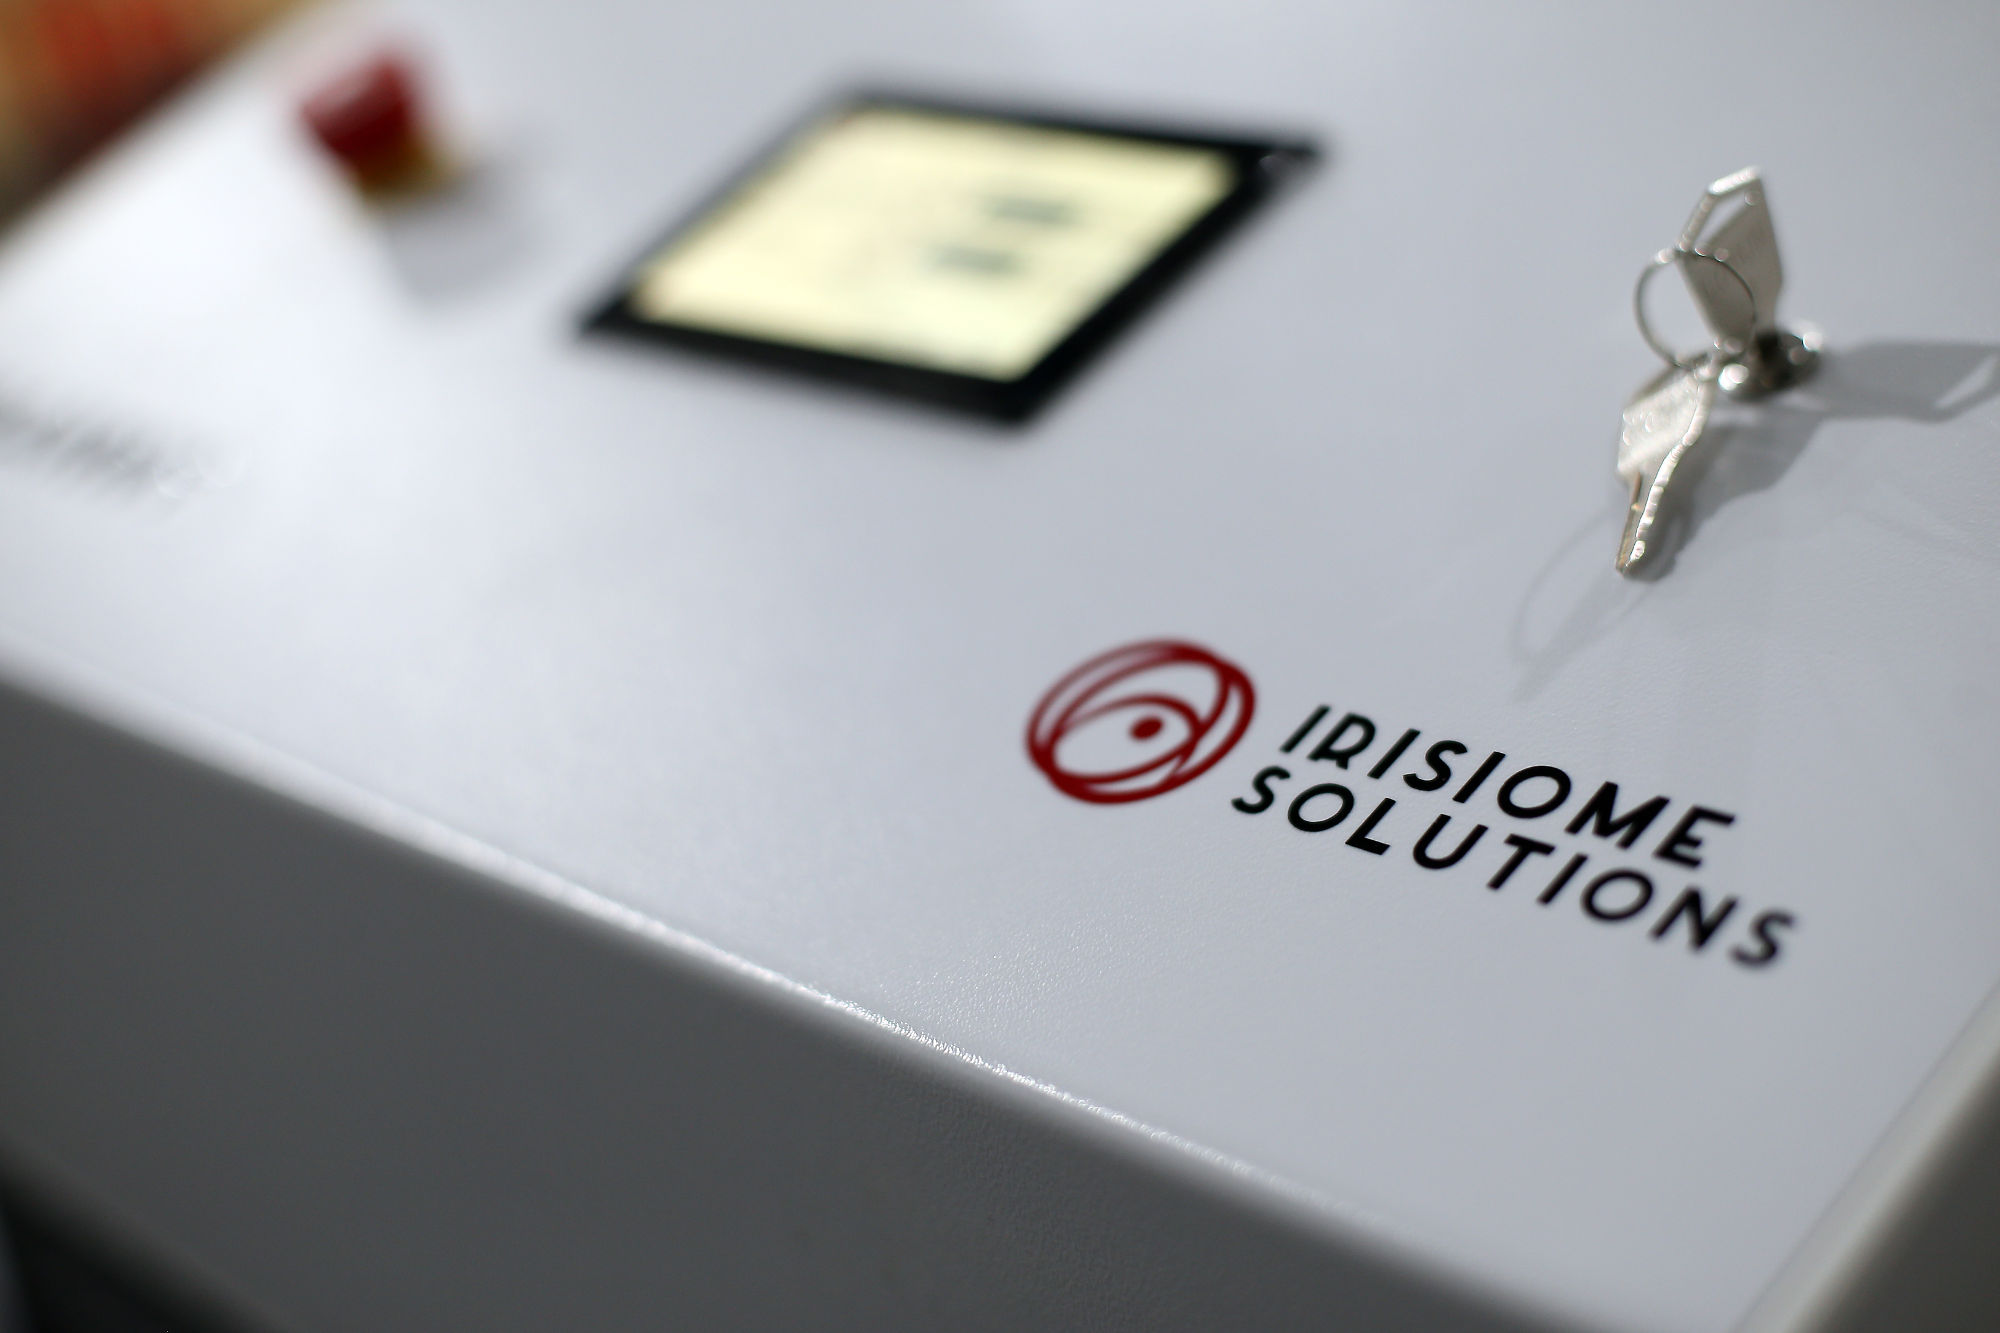 irisiome solutions turn-key tunable picosecond laser